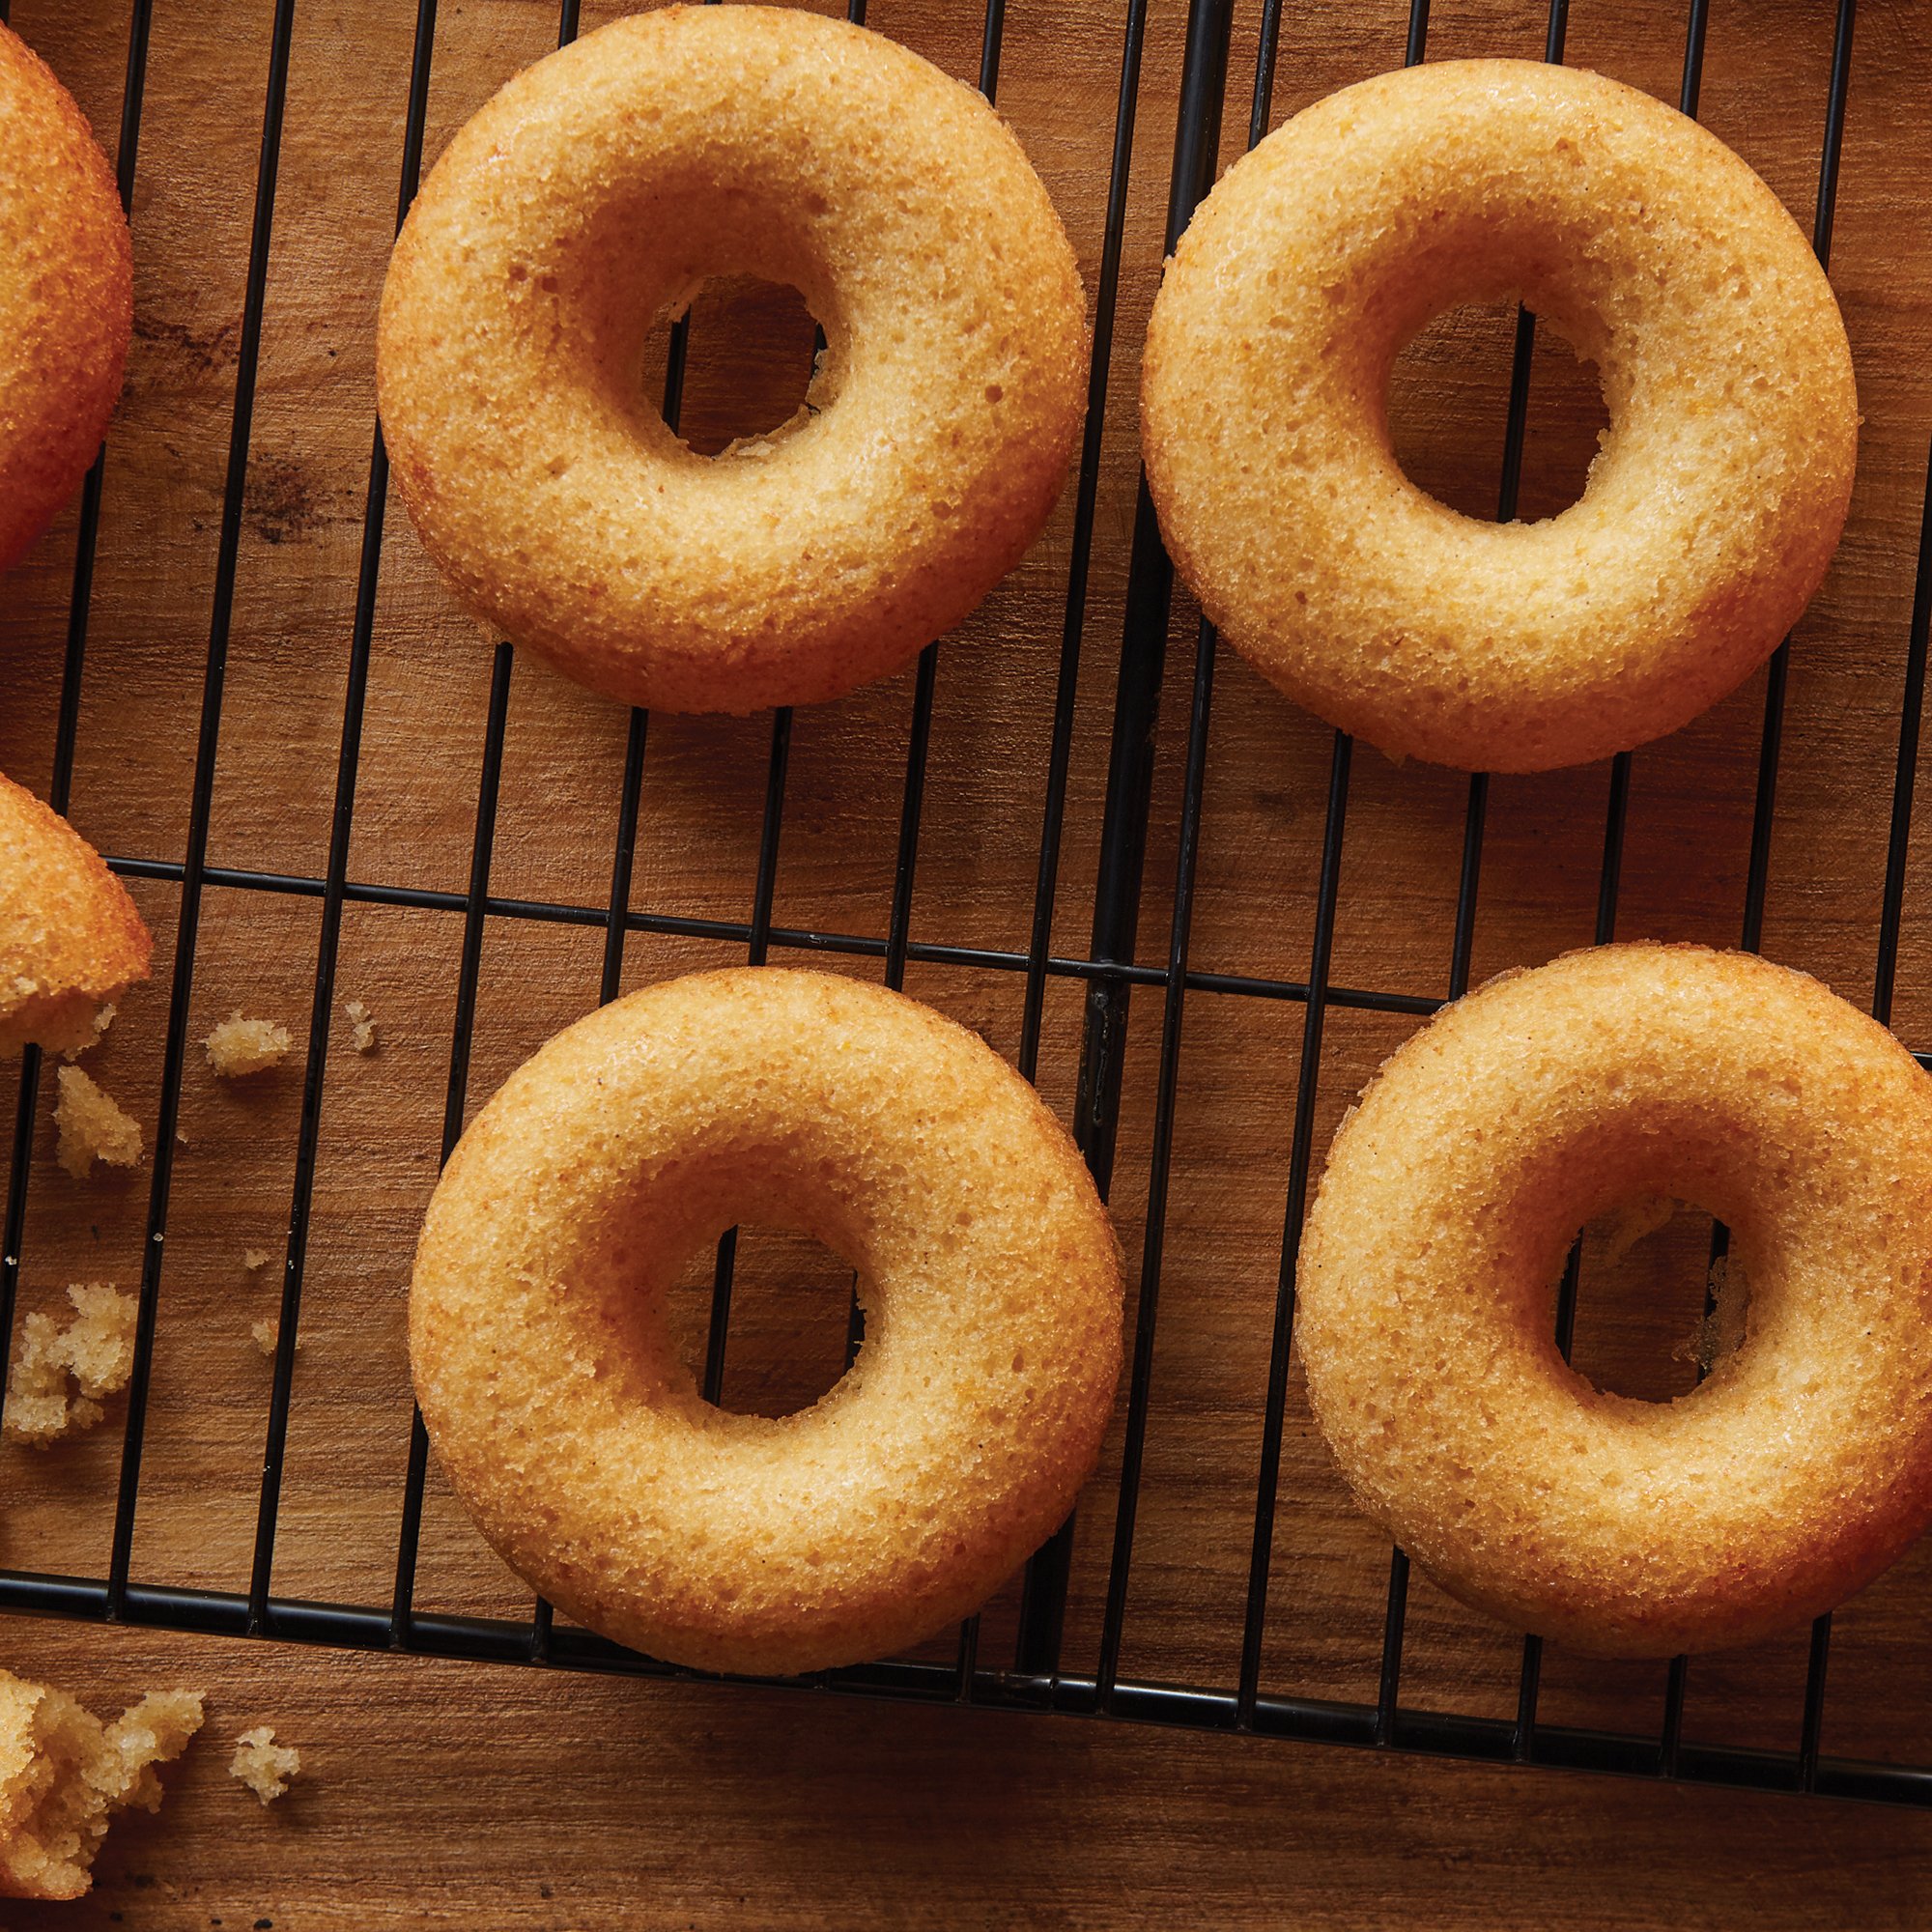 14 Baked Donut Recipes That Are as Delicious as Bakery Versions